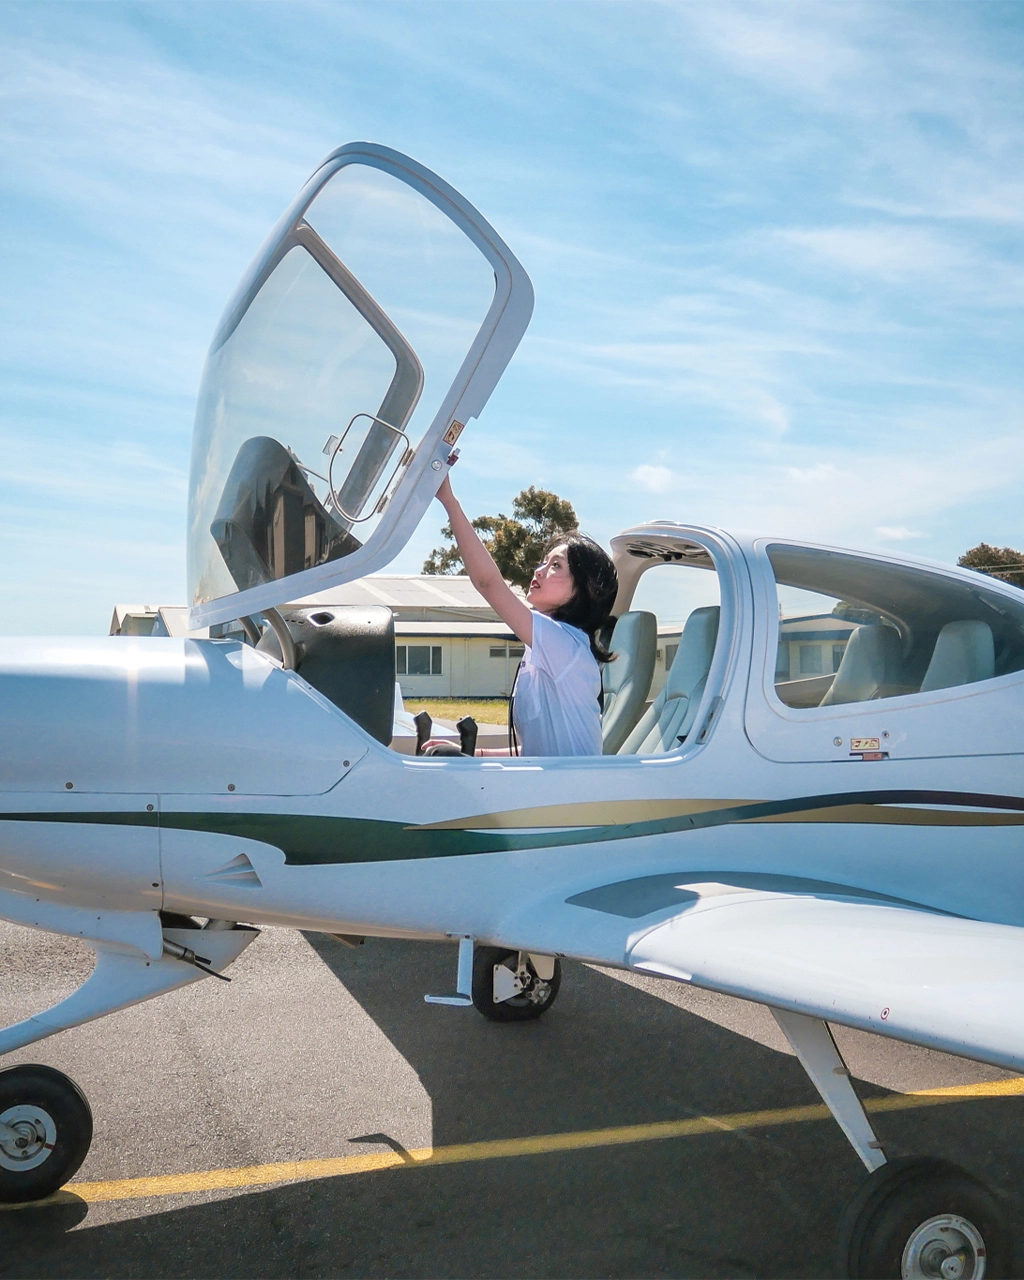 Flight Schools in Australia – How Do I Choose the Right One?